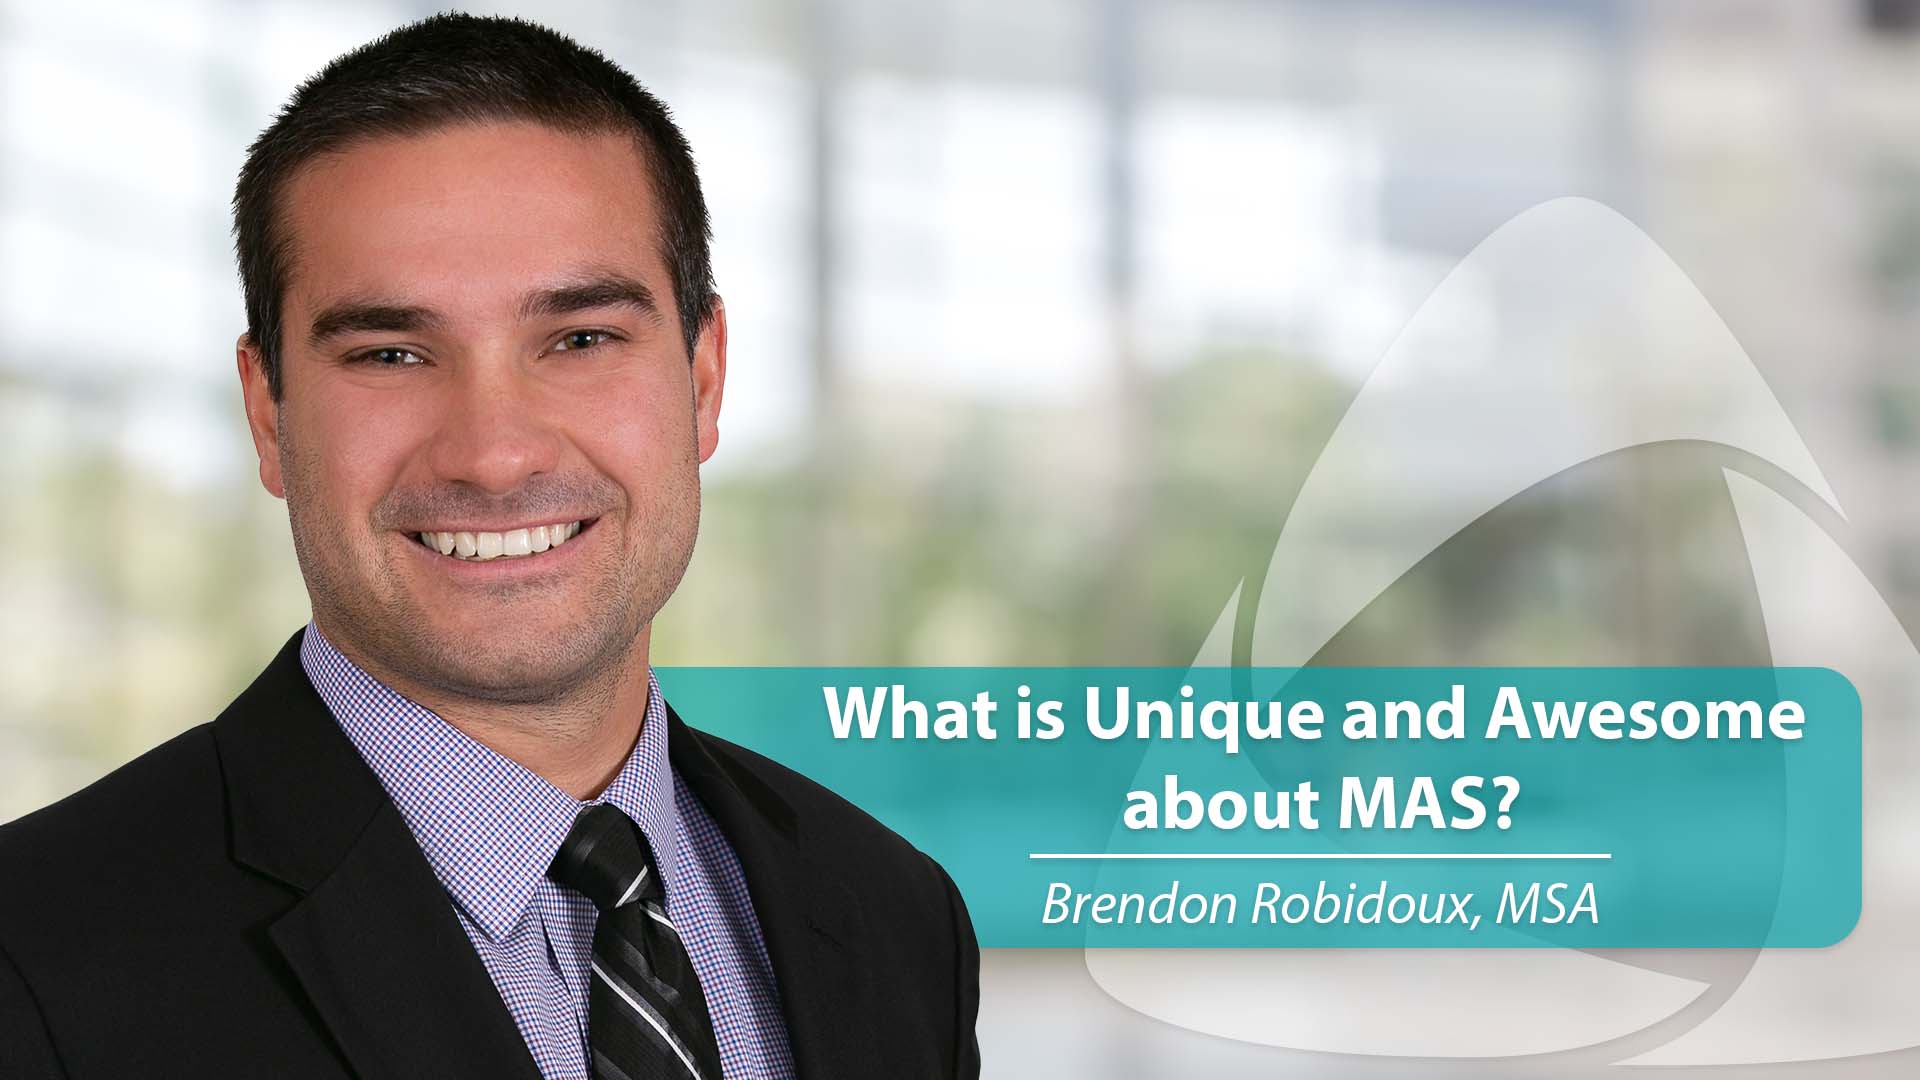 Brendon Robidoux - What is Unique and Awesome about MAS